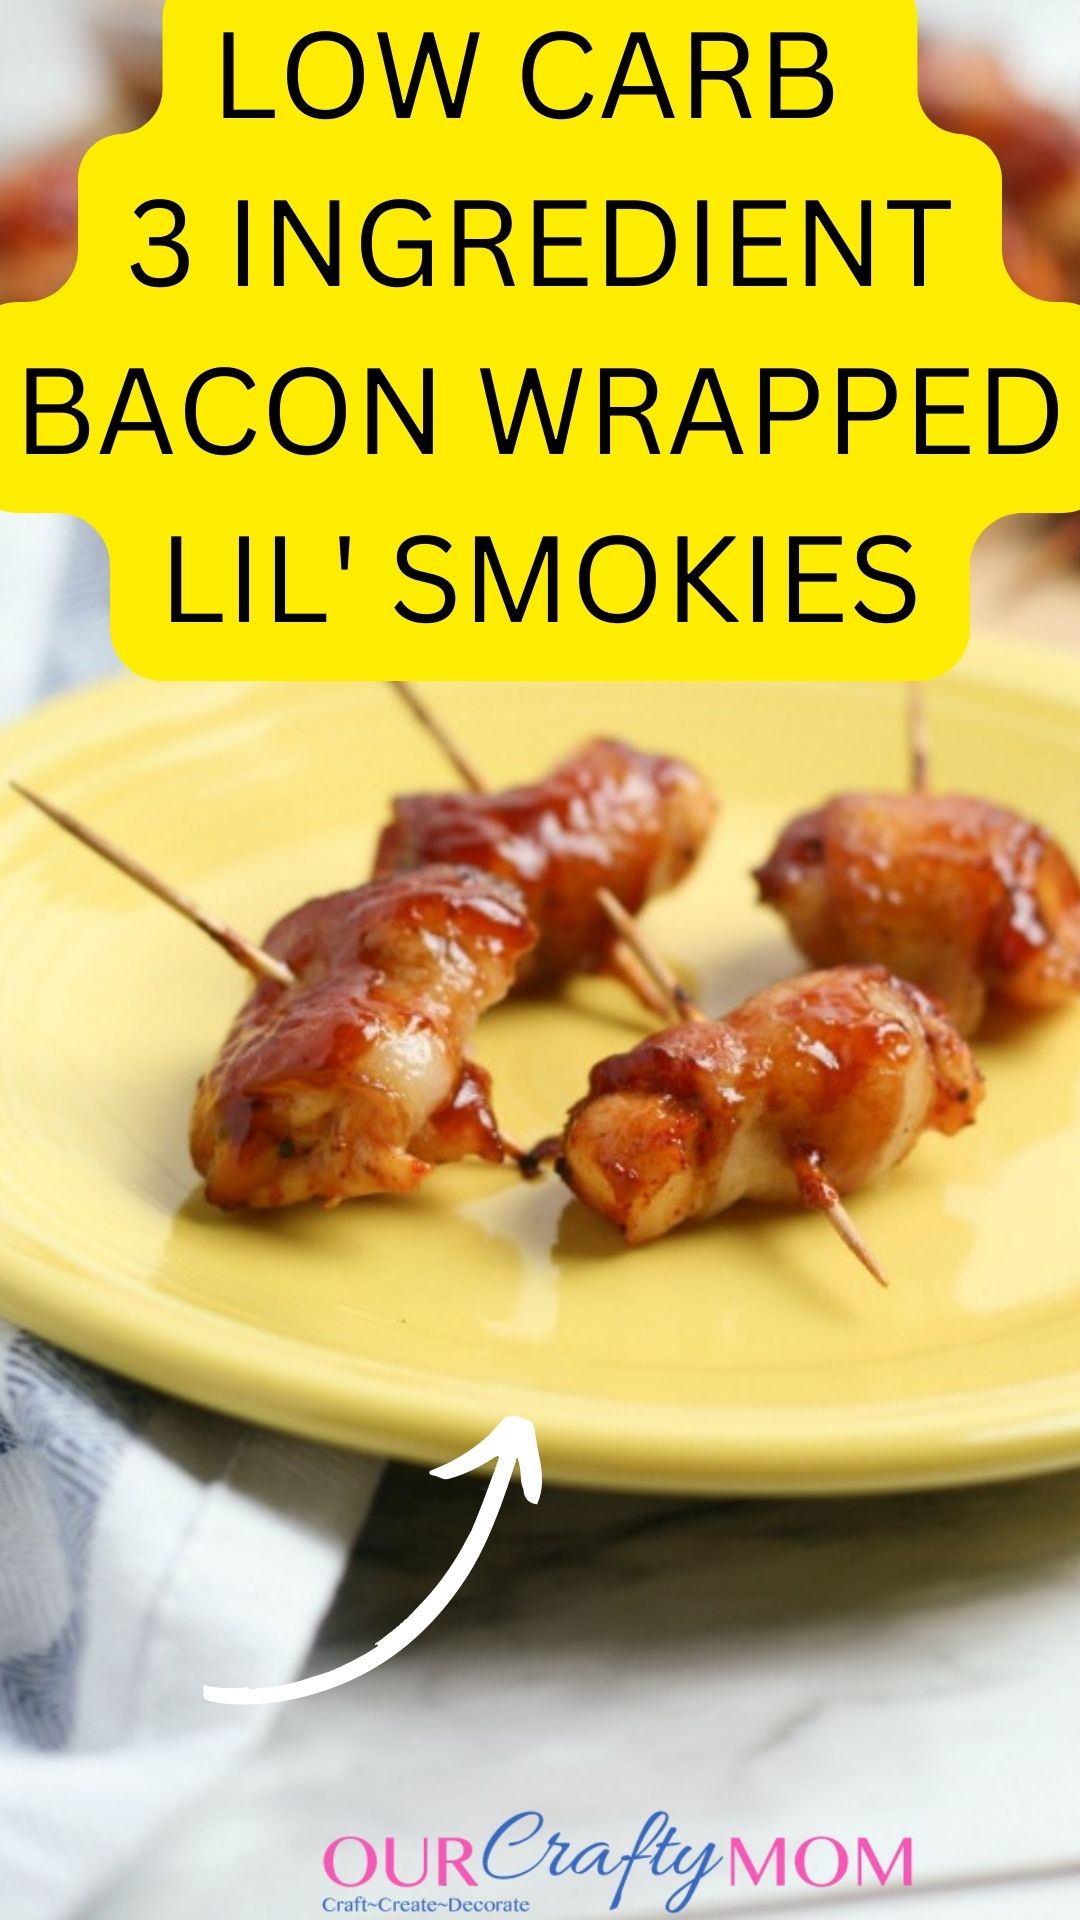 low carb bacon wrapped lil smokies on yellow plate